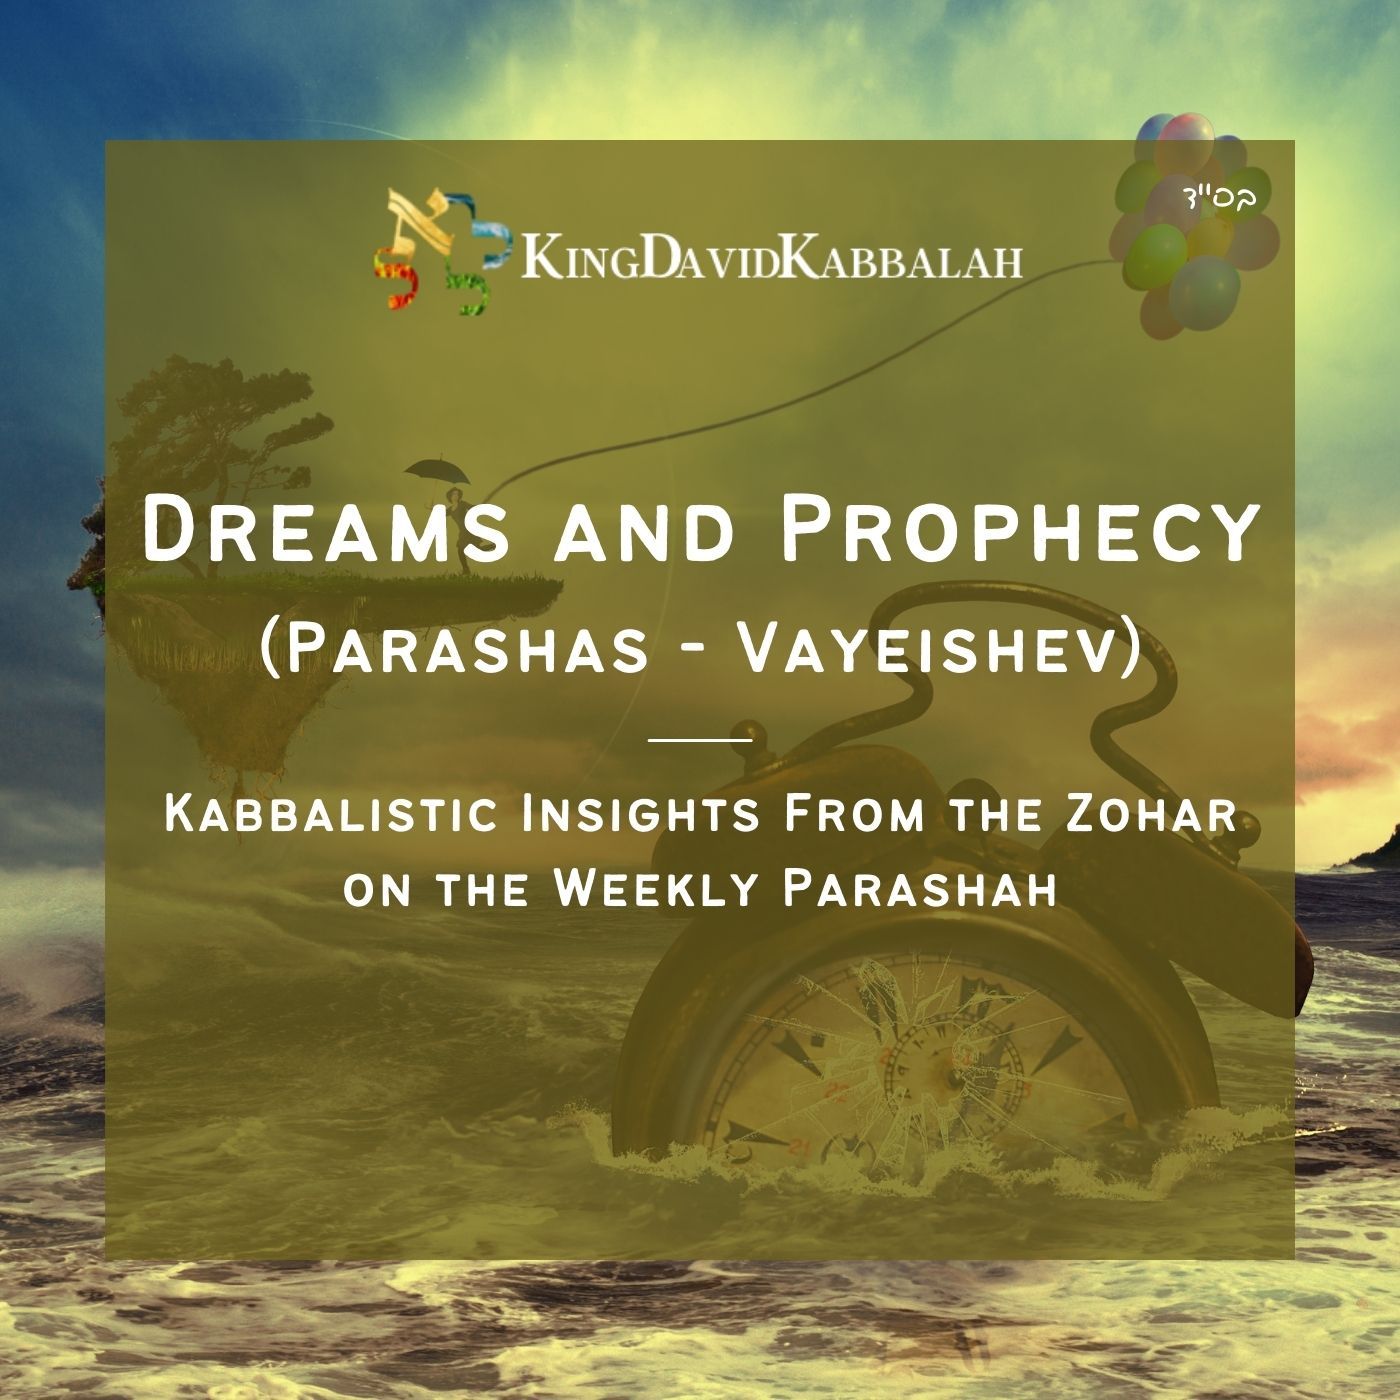 Kabbalistic Inspiration on the Parasha from the Zohar - Dreams and Prophecy